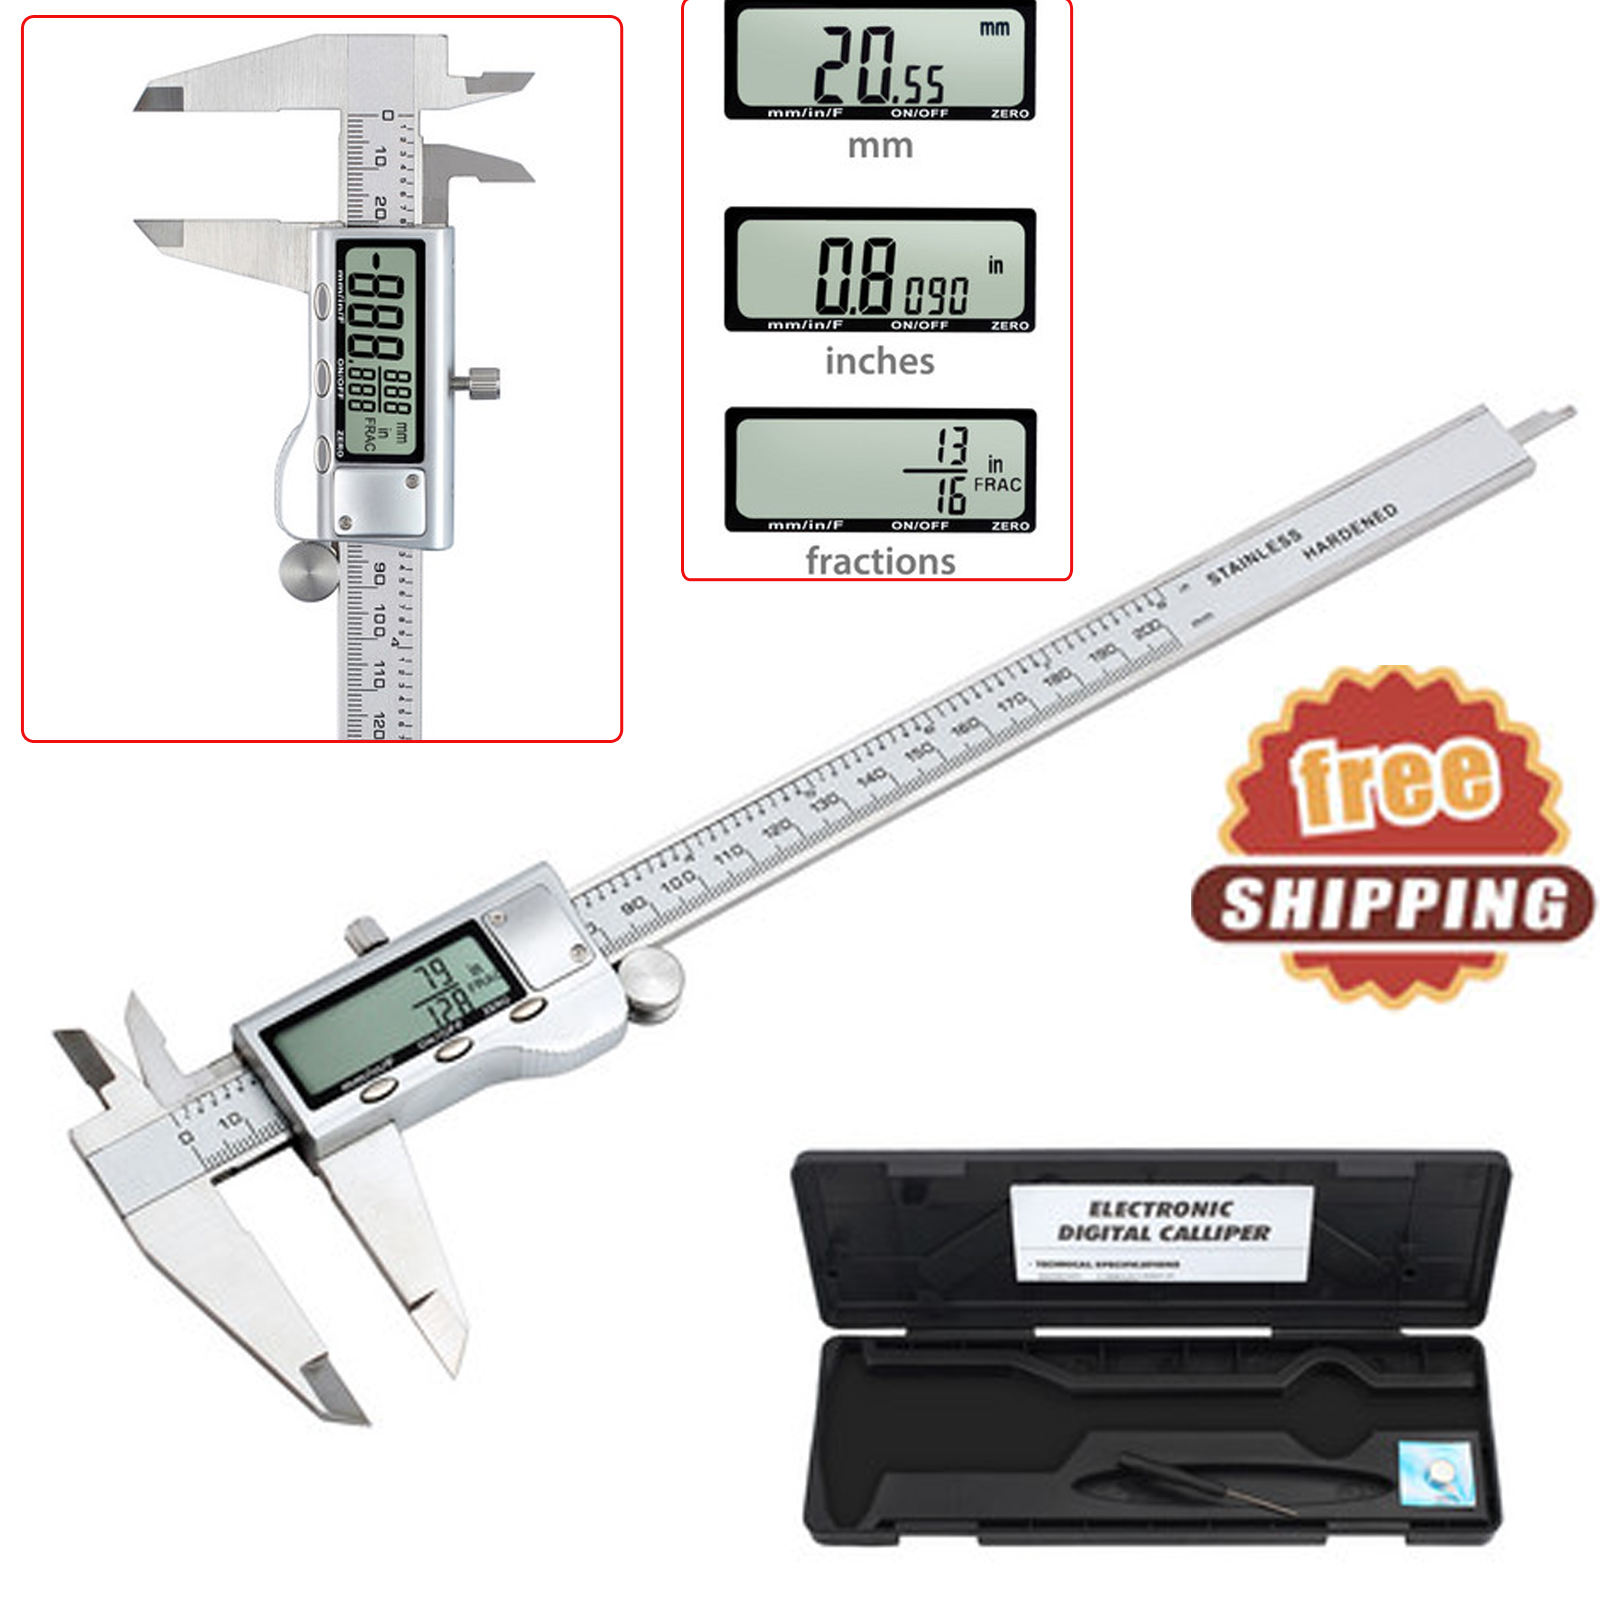 Depth and Step Measurement Digital Vernier Caliper,150mm//6Inch Stainless Steel Electronic Vernier Micrometer Guage Tool with LCD Screen Measuring Tool Caliper for for Internal External